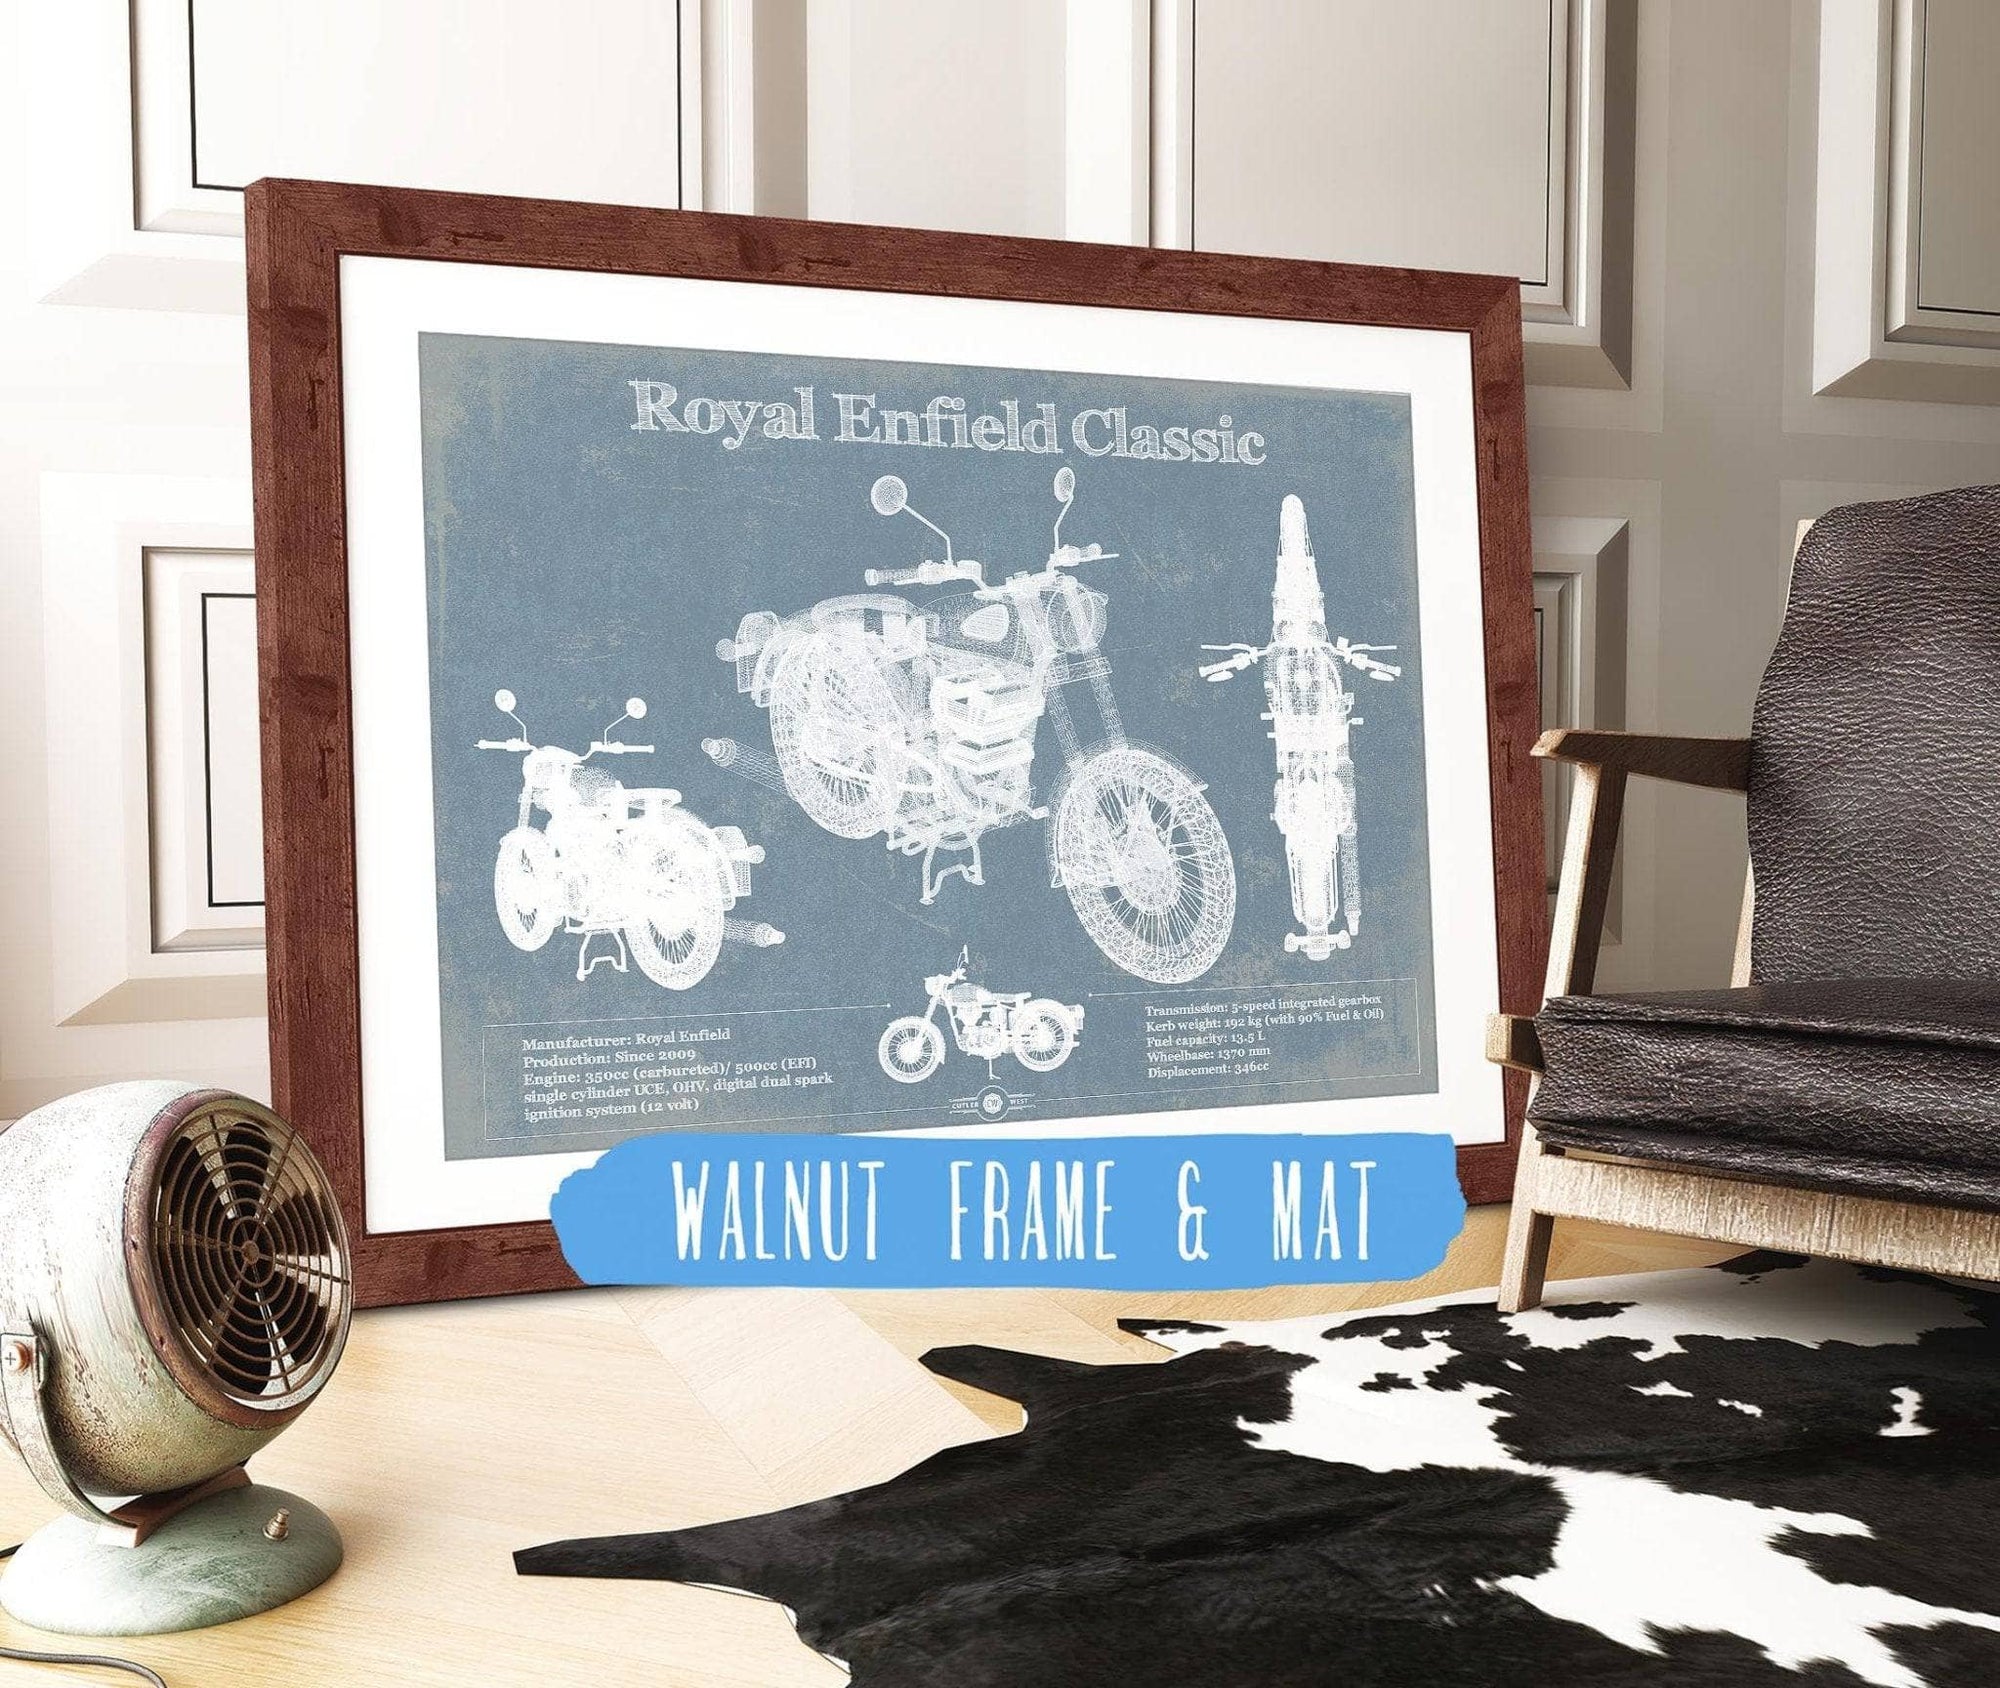 Cutler West 14" x 11" / Walnut Frame & Mat Royal Enfield Classis 350 And 500 Blueprint Motorcycle Patent Print 933350105_17676